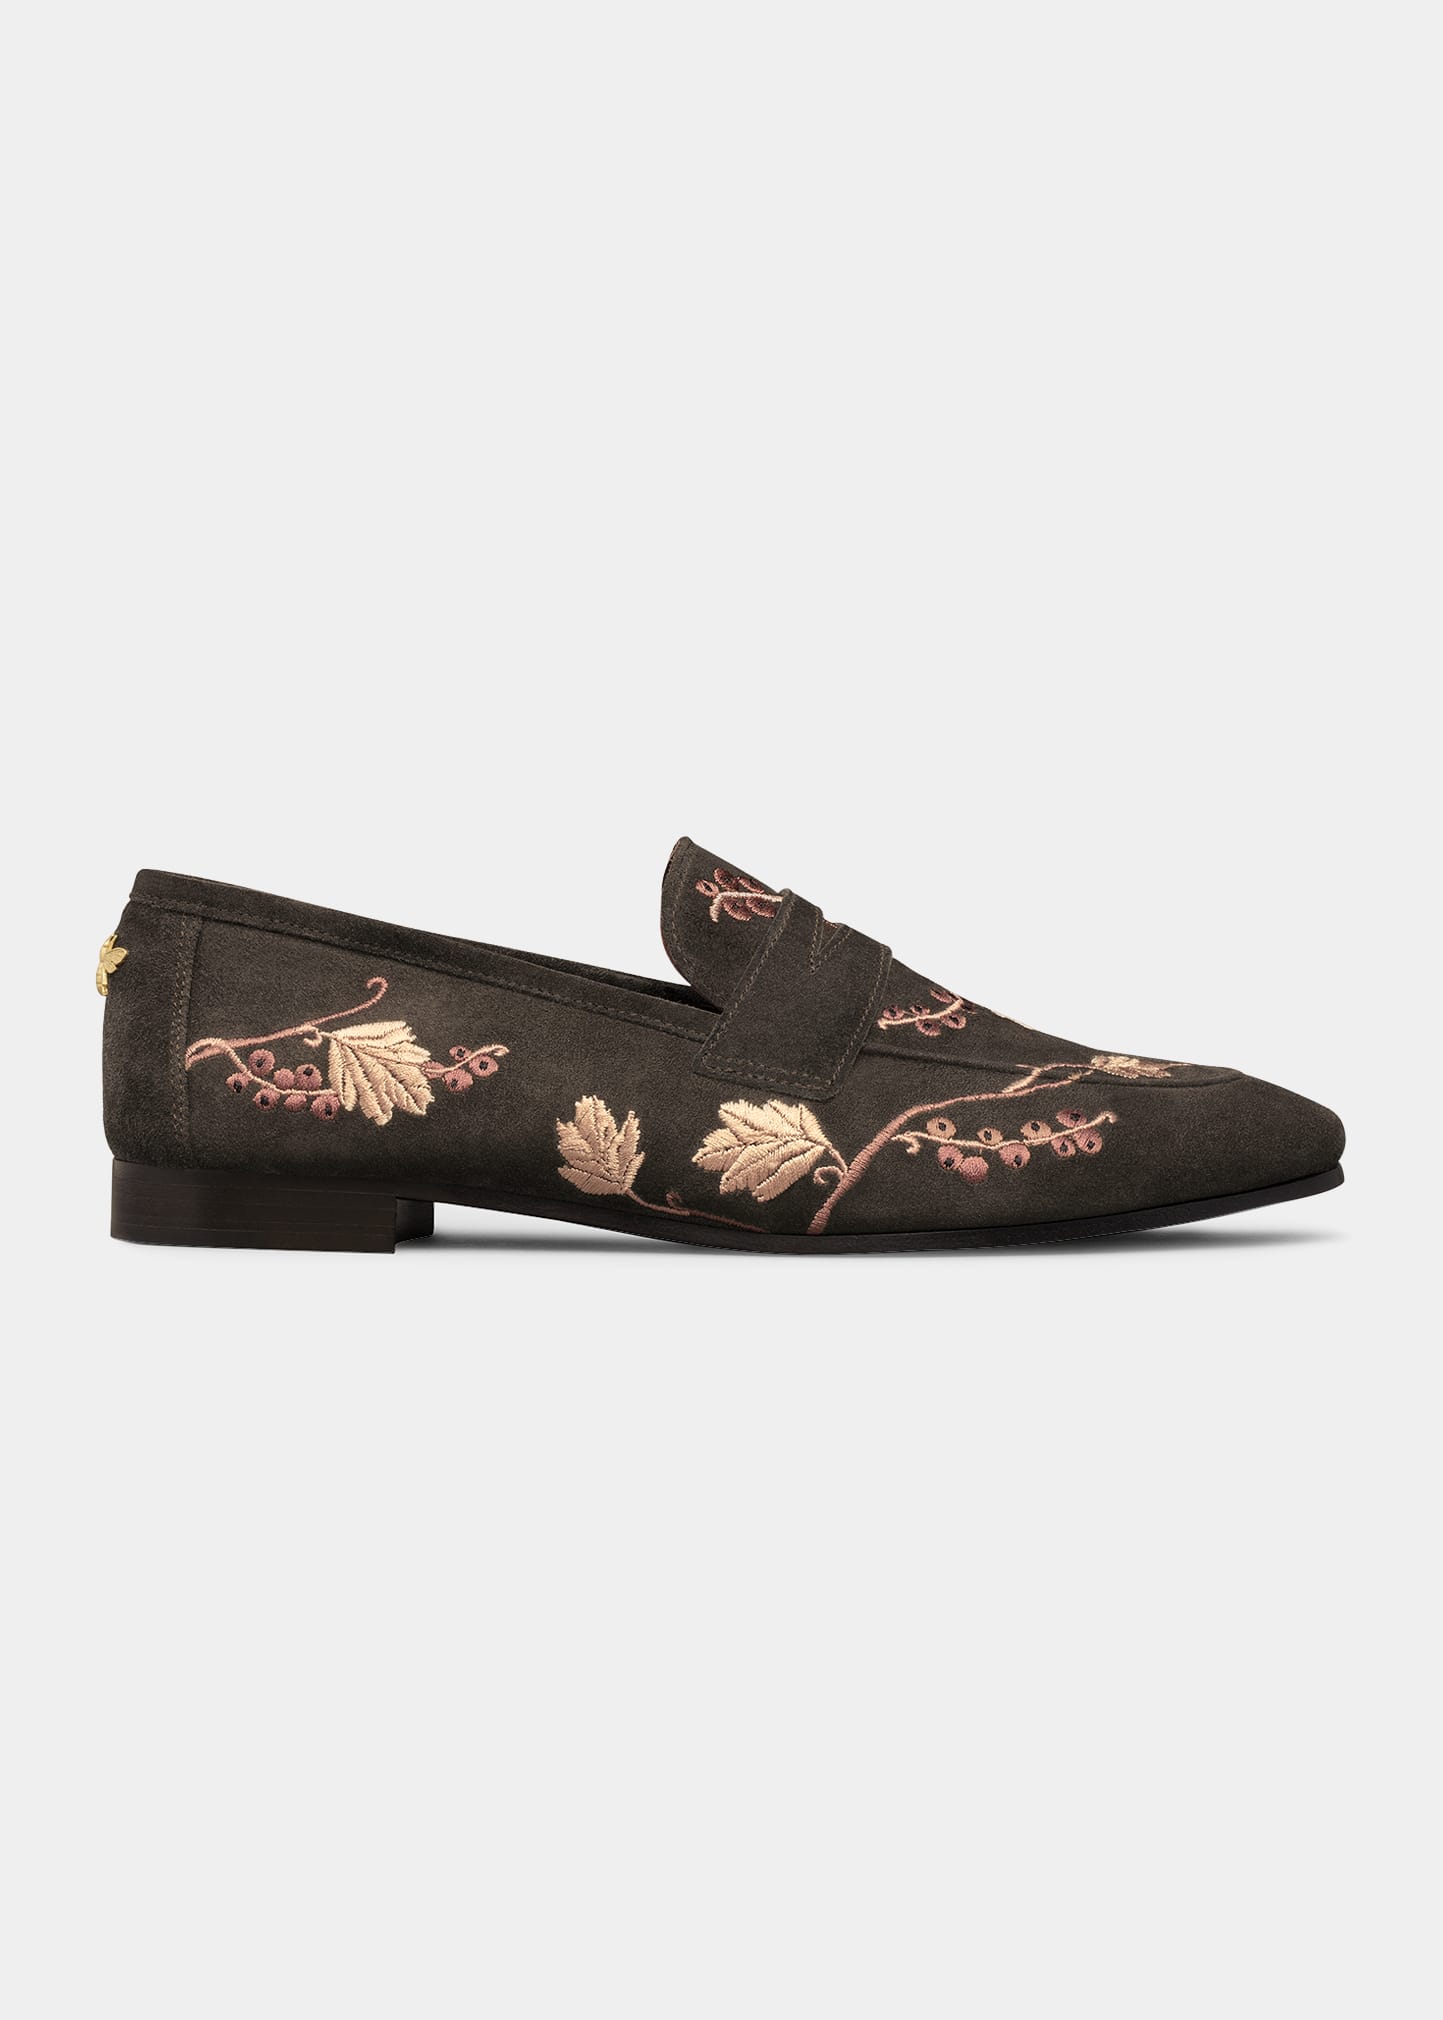 Bougeotte Flaneur Floral Embroidered Penny Loafers In Brown Powder